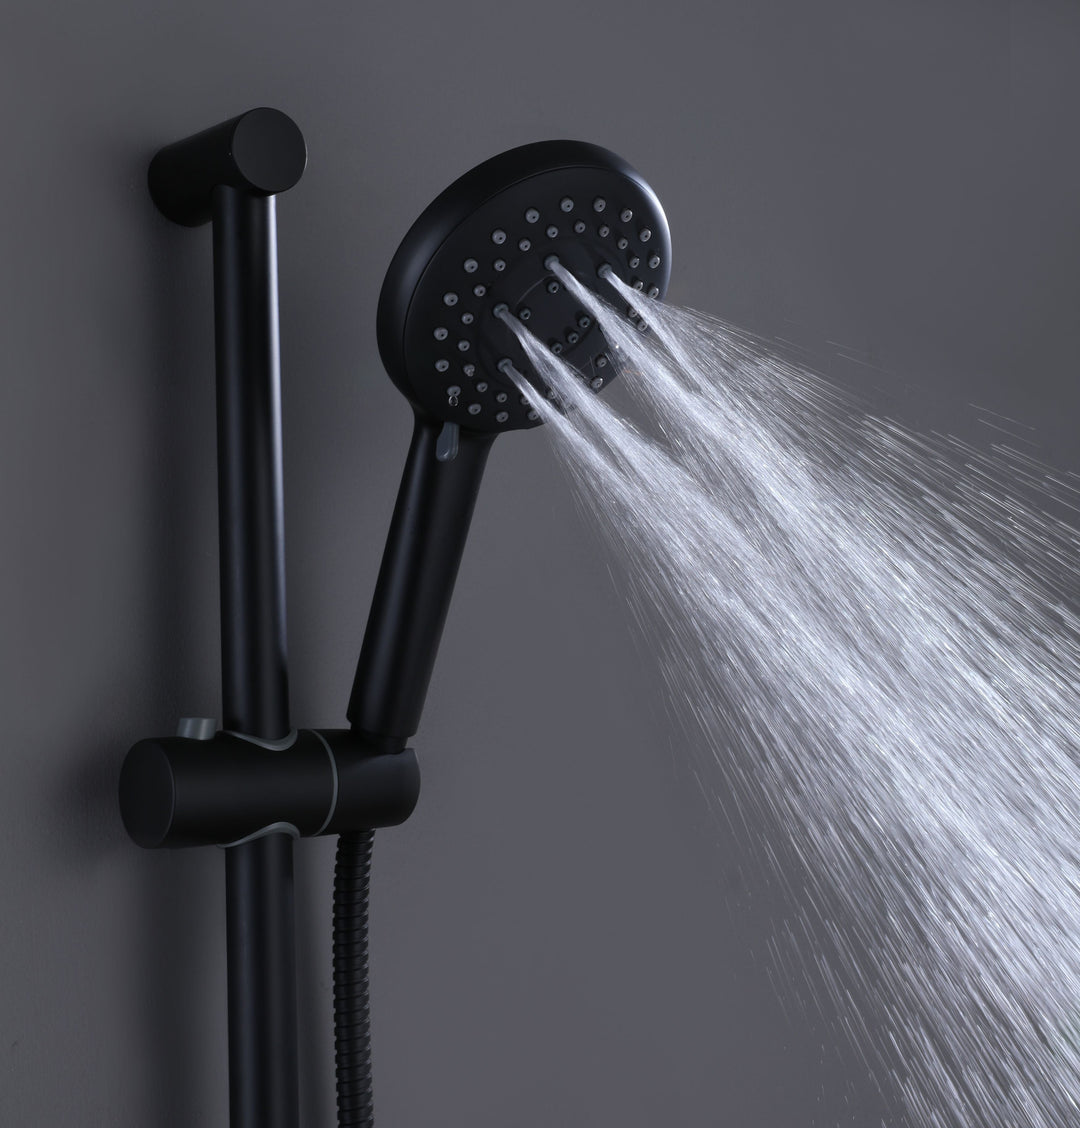 Multi-Function Handheld Shower With Slide Bar And 59-Inch Long Hose